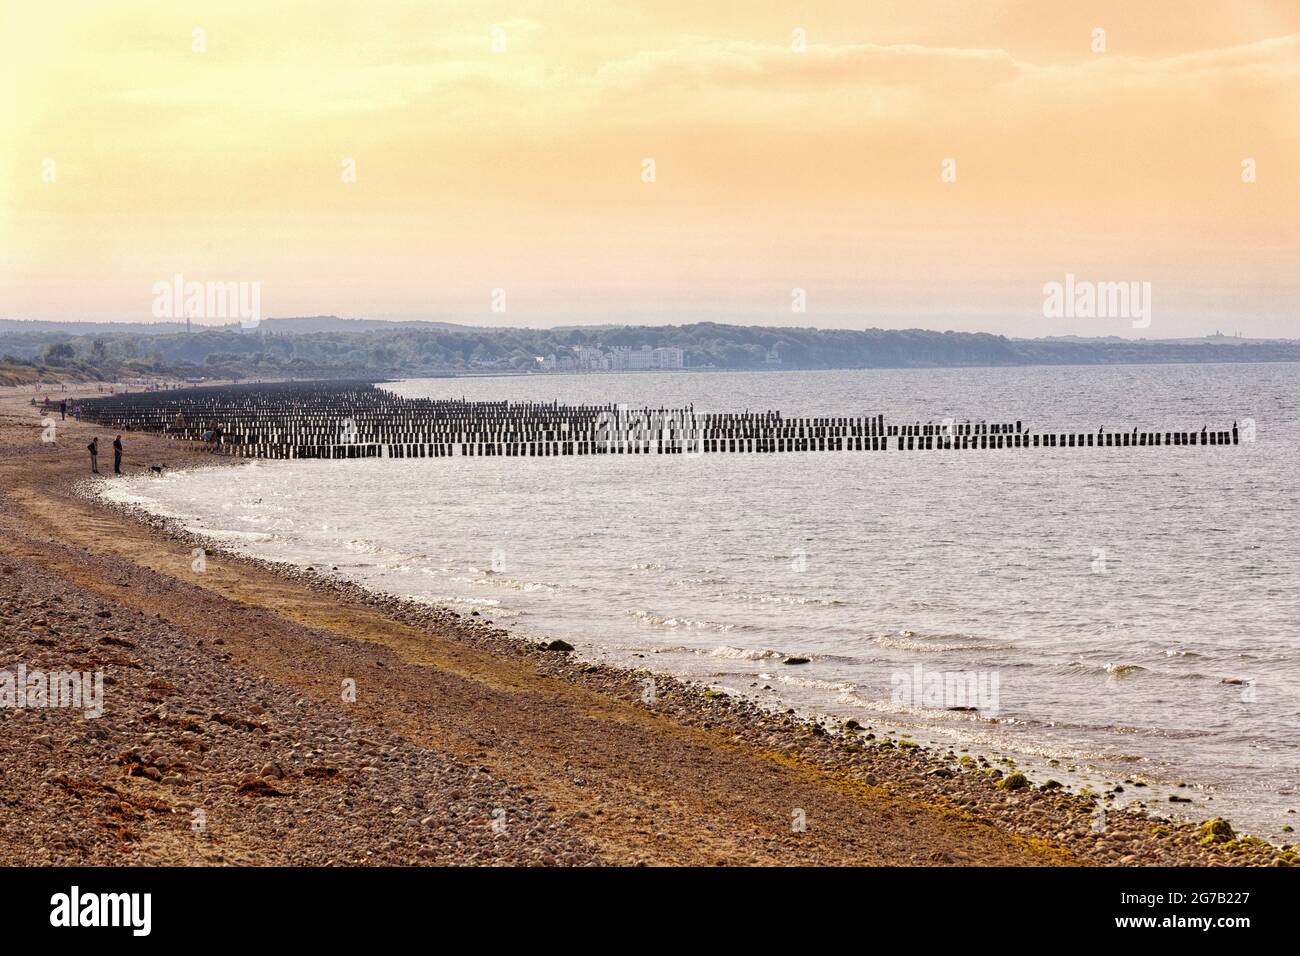 Beach with groynes in the foreground with a view of Heiligendamm, Mecklenburg-Western Pomerania, Germany Stock Photo